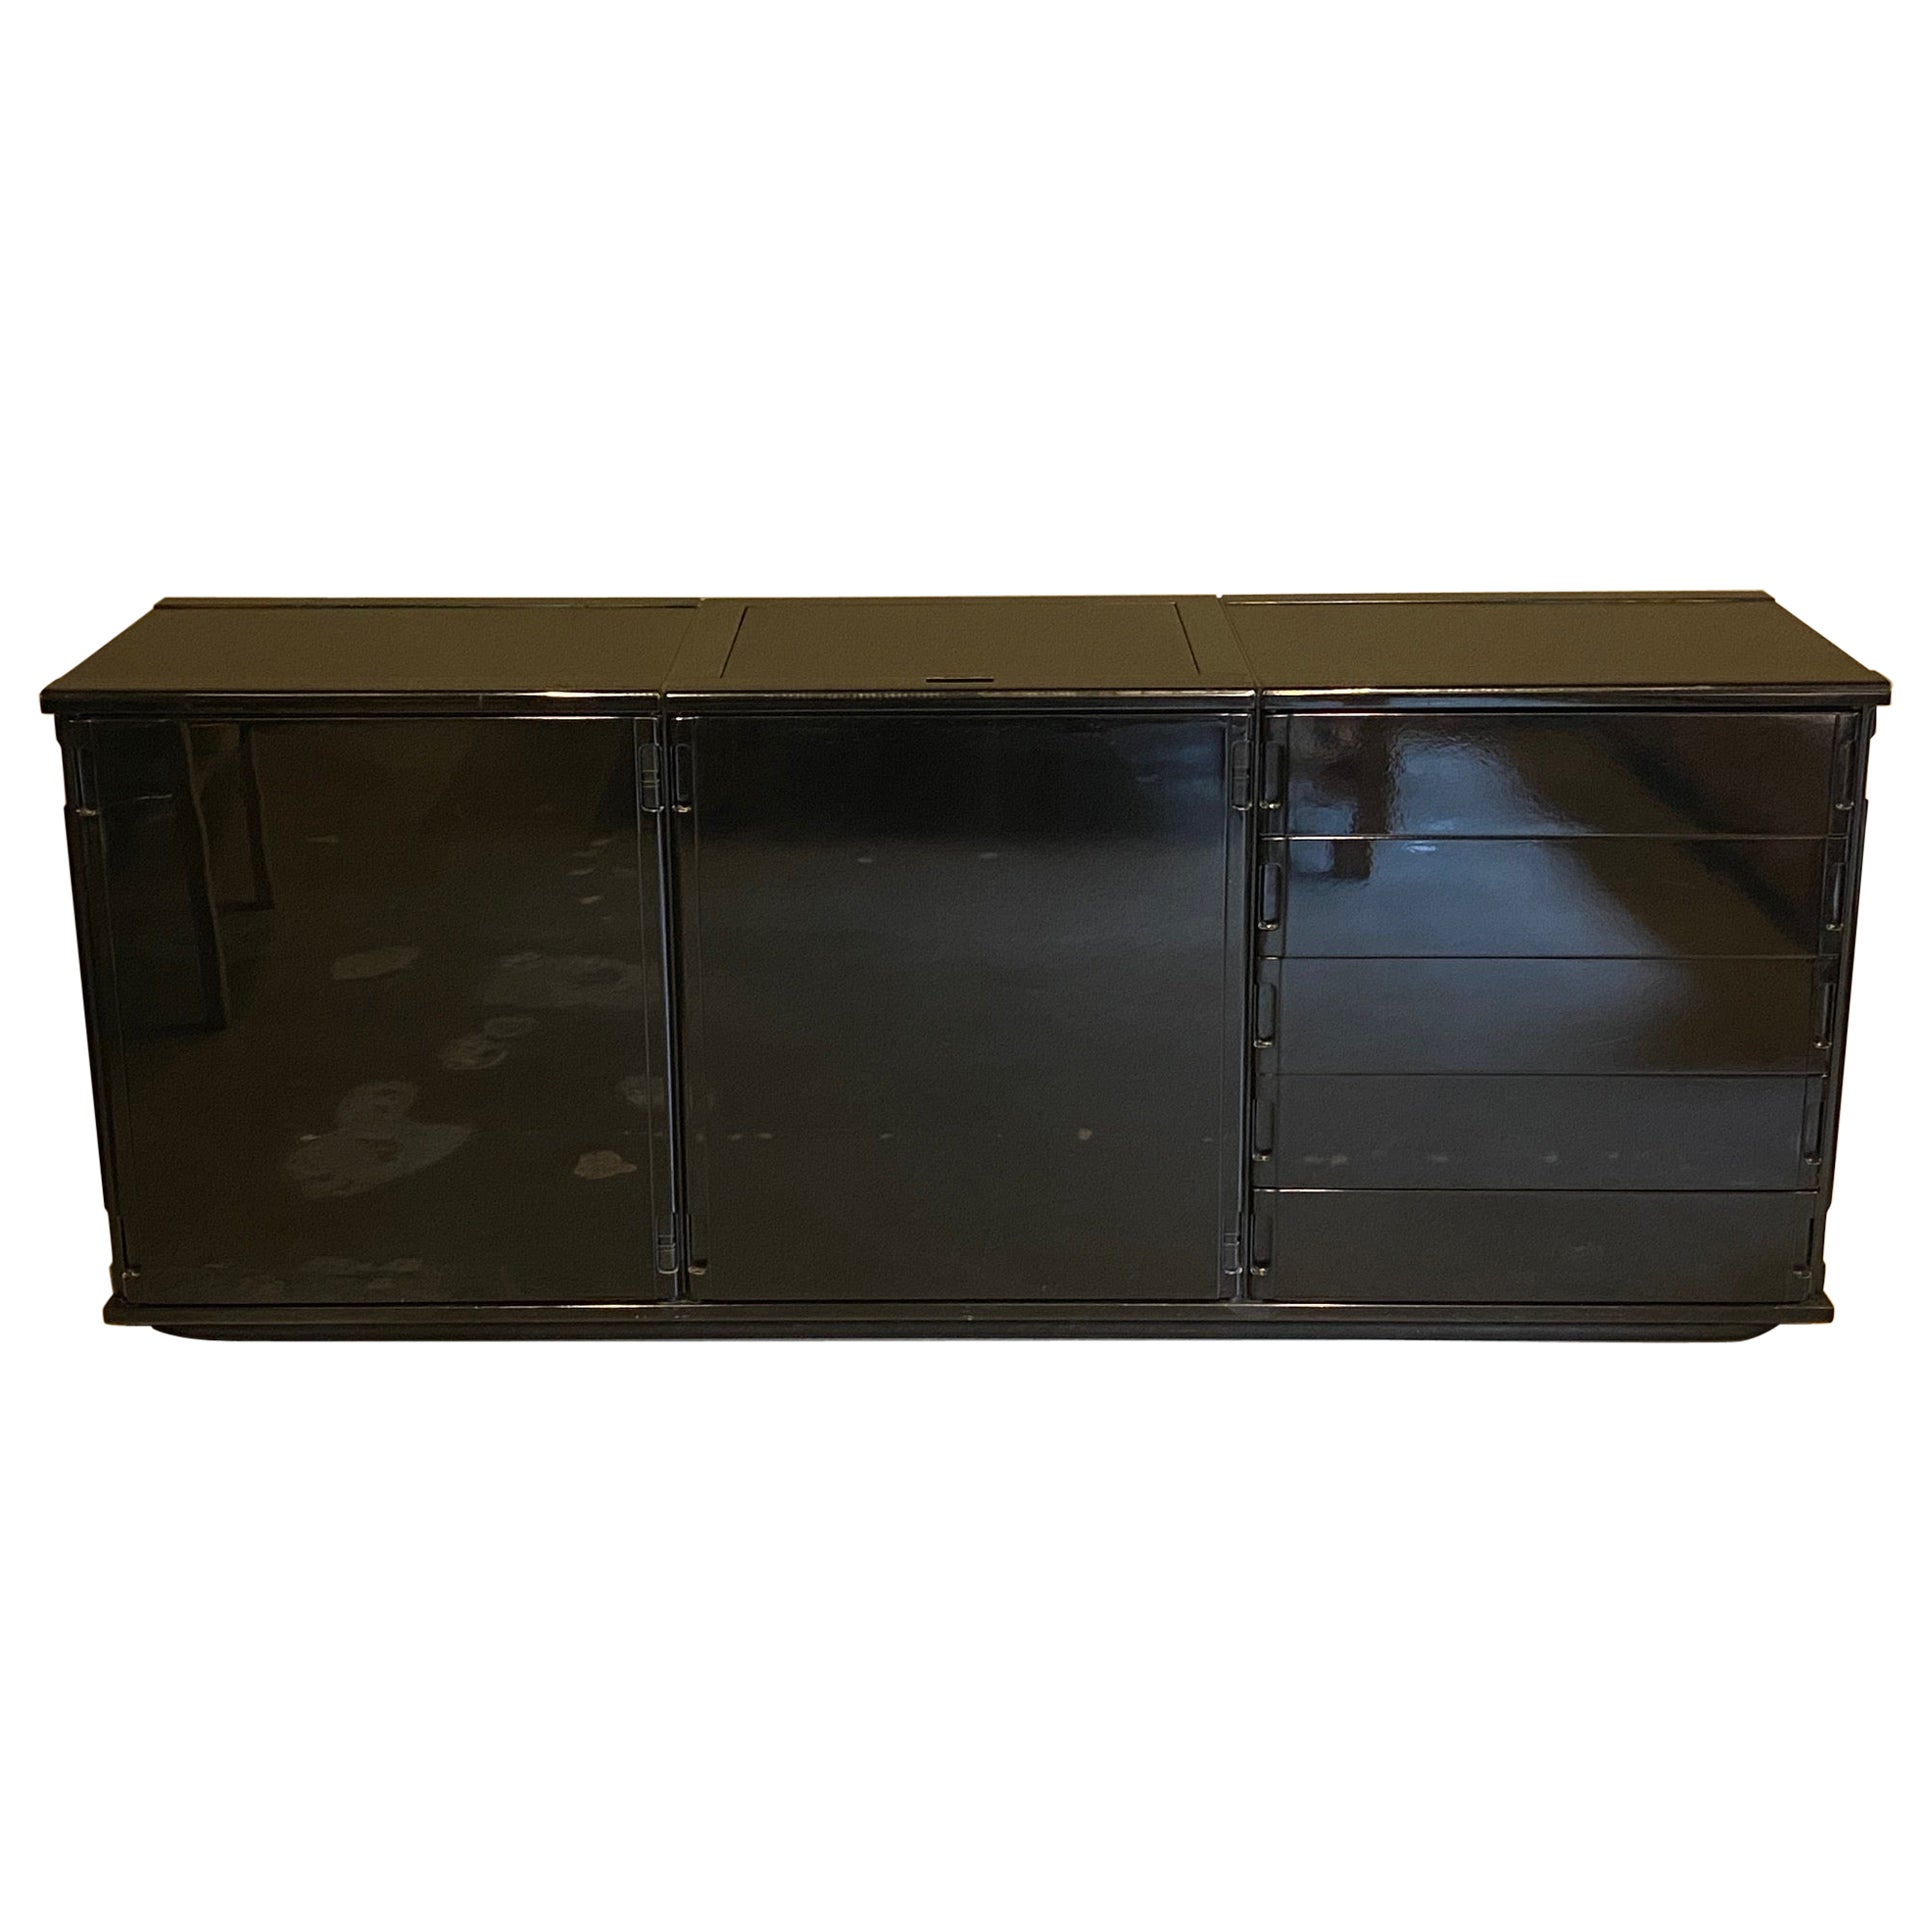 Gianfranco Frattini Larco Series Sideboard for Molteni, Italy, 1970s For Sale